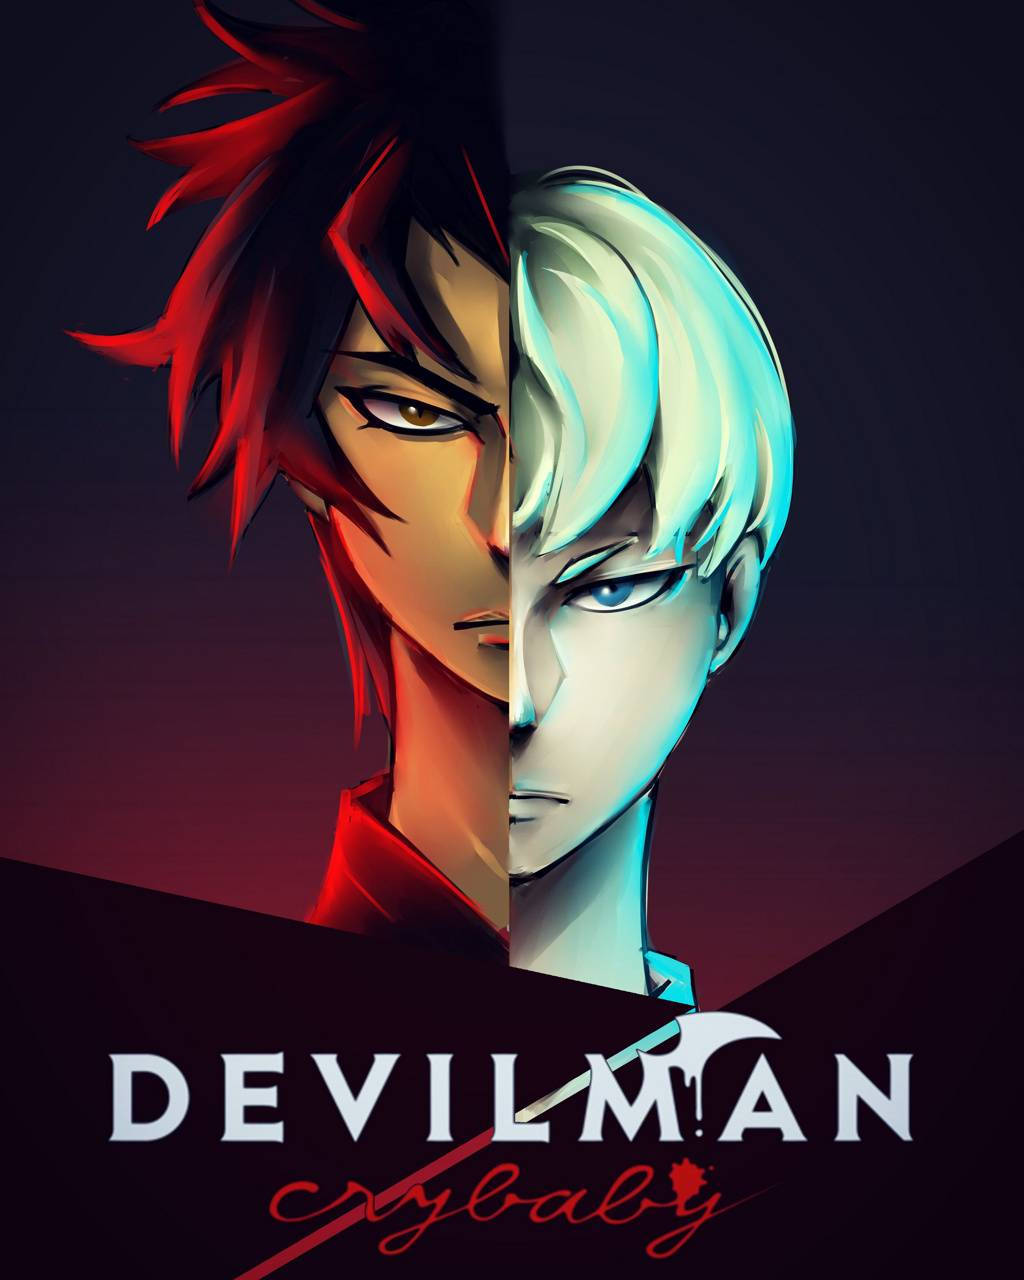 Enter The Dark And Enigmatic World Of Devilman Crybaby. Background